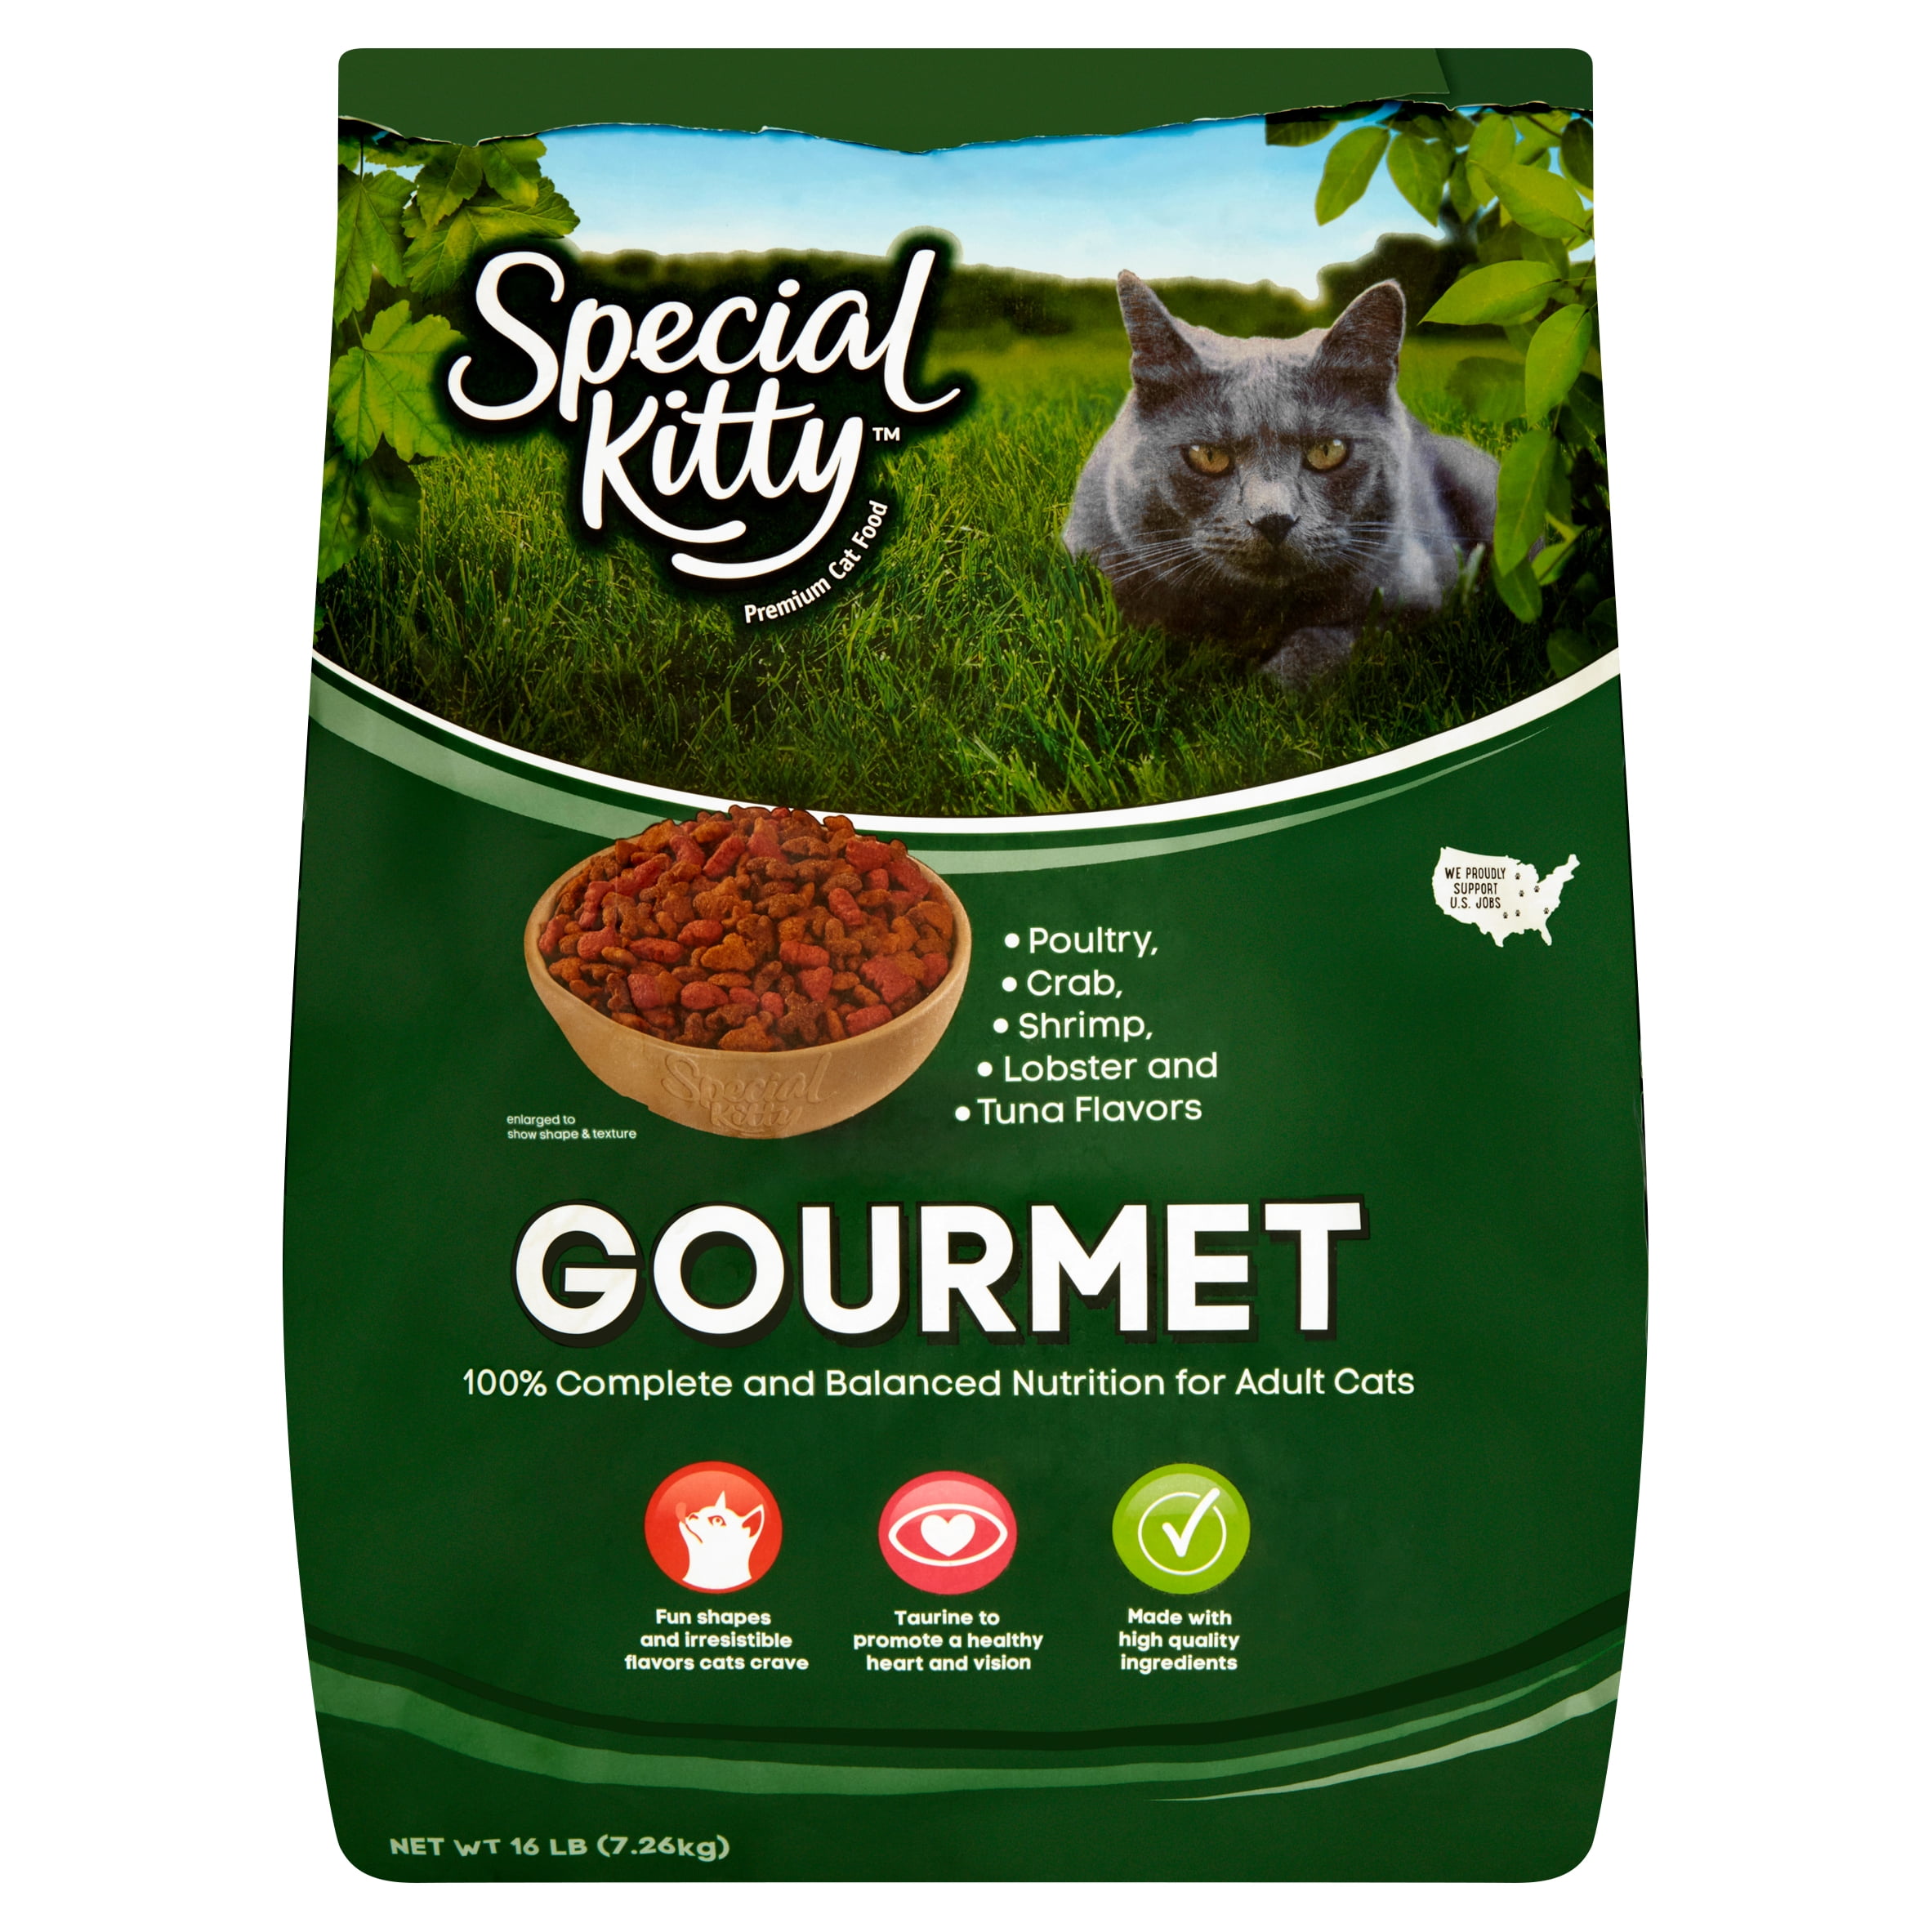 special kitty cat food